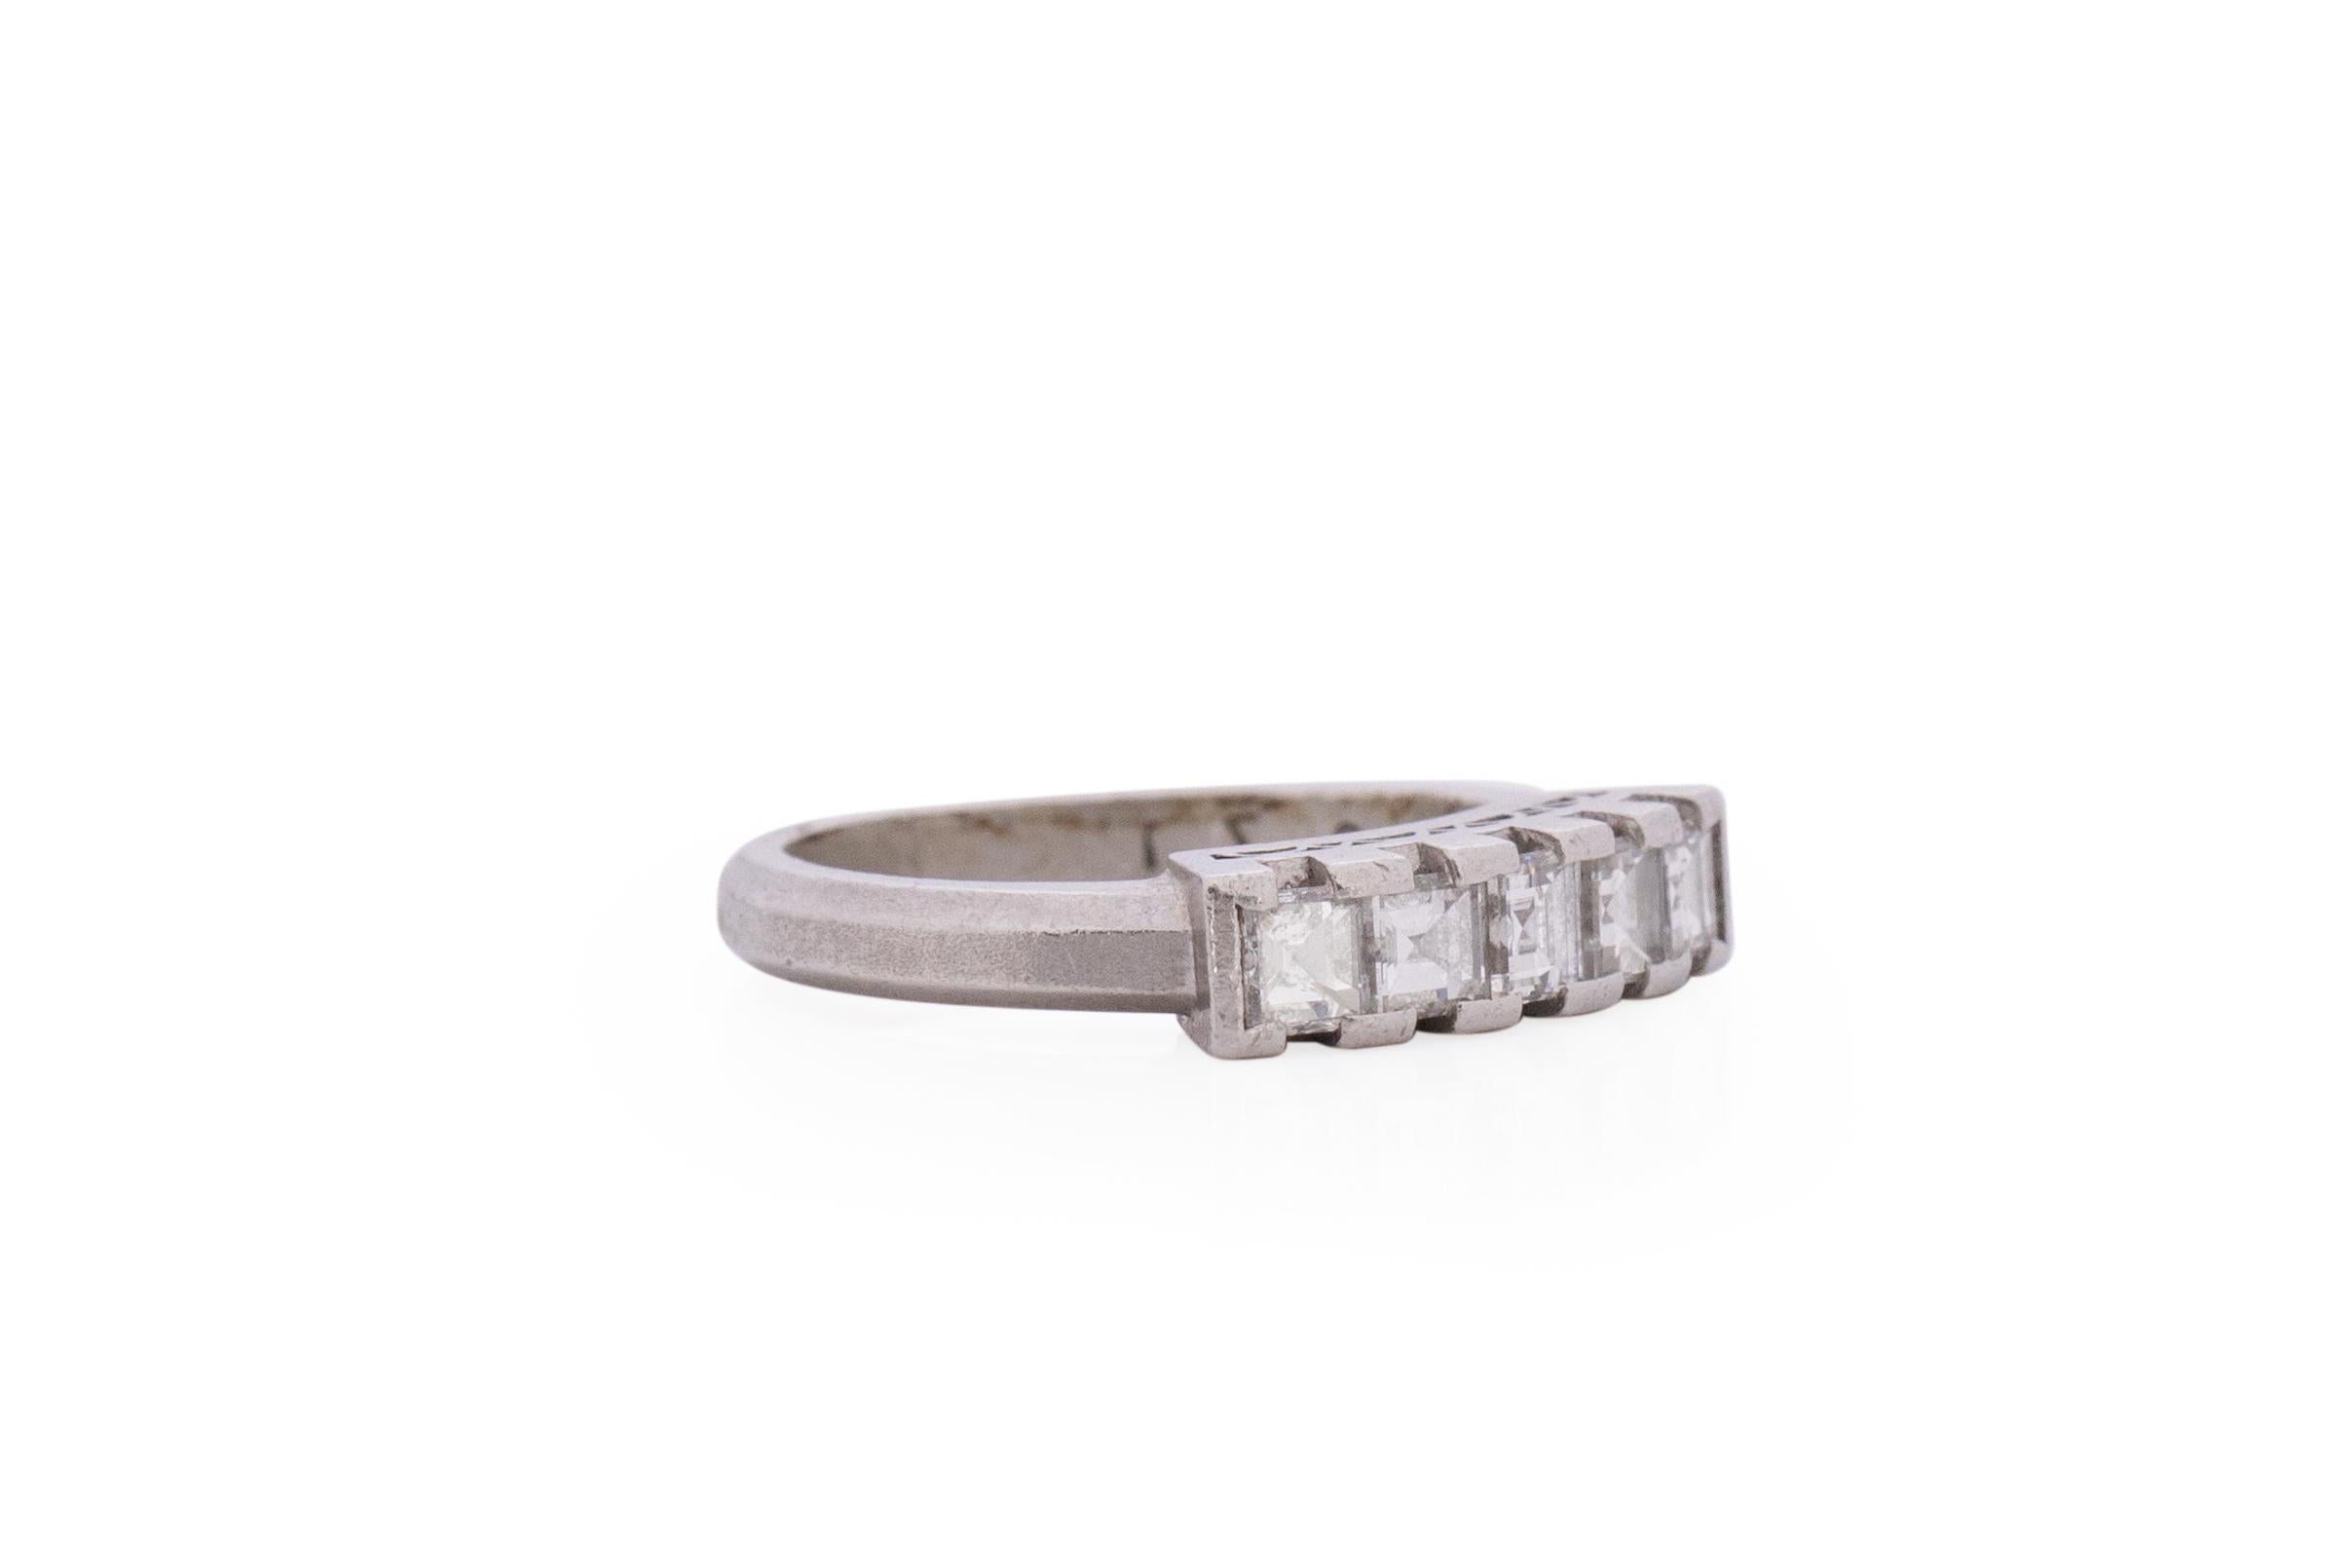 Item Details: 
Ring Size: 4.5
Metal Type: Platinum [Hallmarked, and Tested]
Weight: 3.0 grams

Diamond Details:
Weight: .73 carat total weight
Cut: Carre Cut
Color: F
Clarity: VS

Finger to Top of Stone Measurement: 5mm
Condition: Excellent